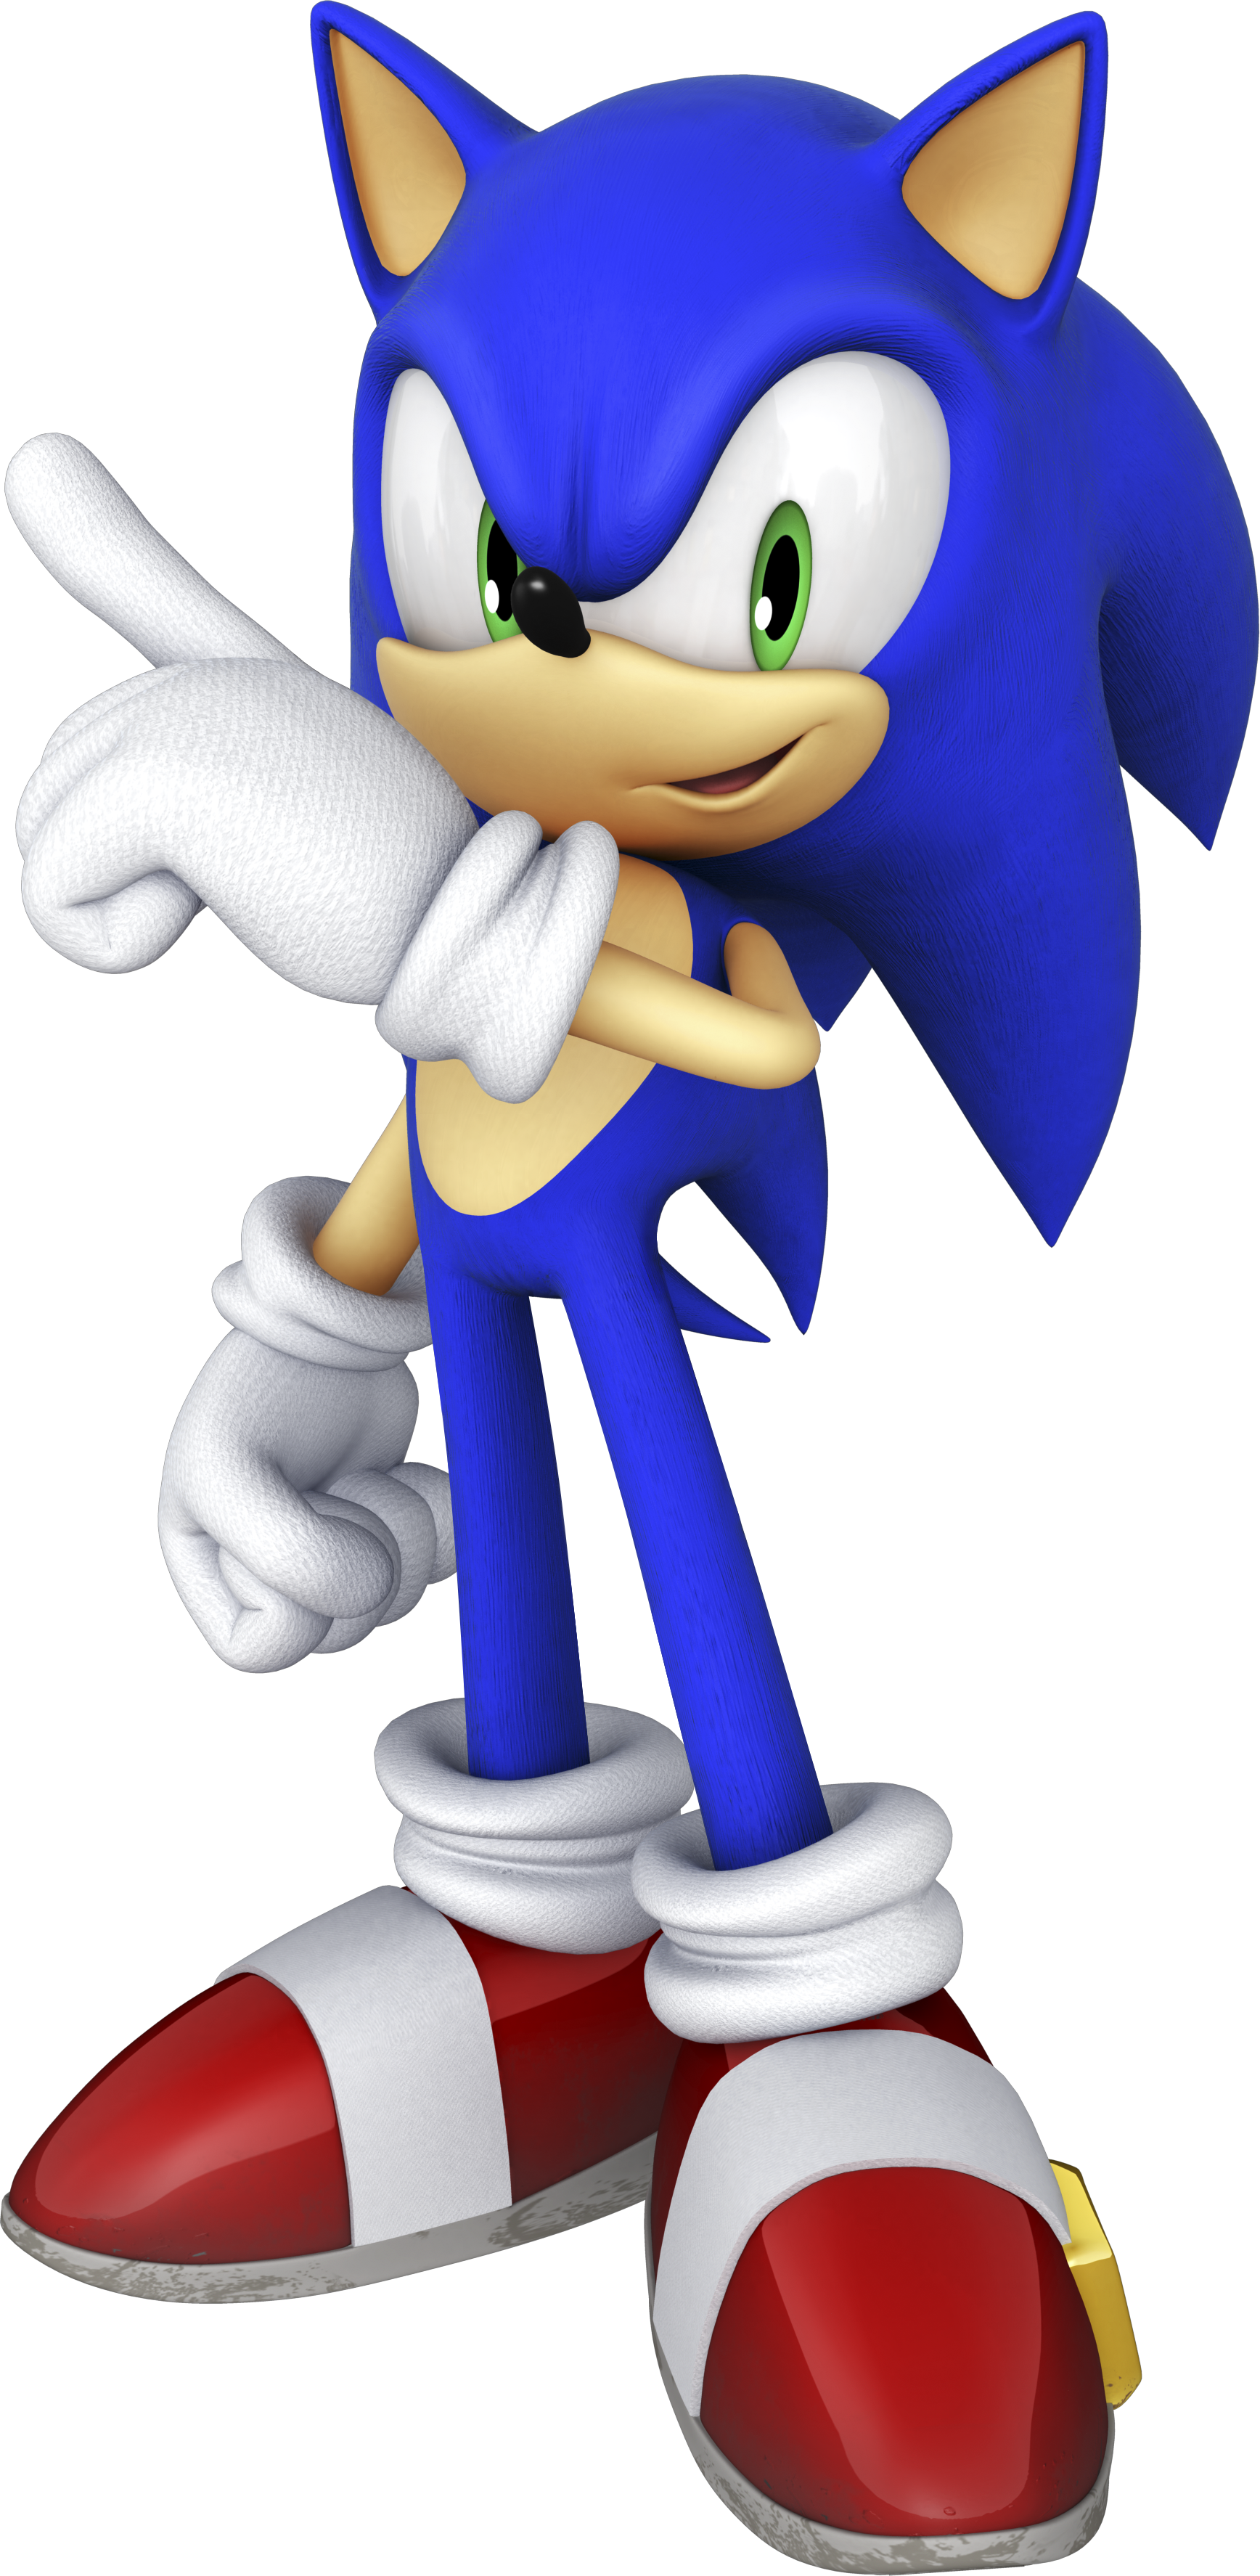 Sonic The Hedgehog Png - Sonic The Hedgehog.png, Transparent background PNG HD thumbnail